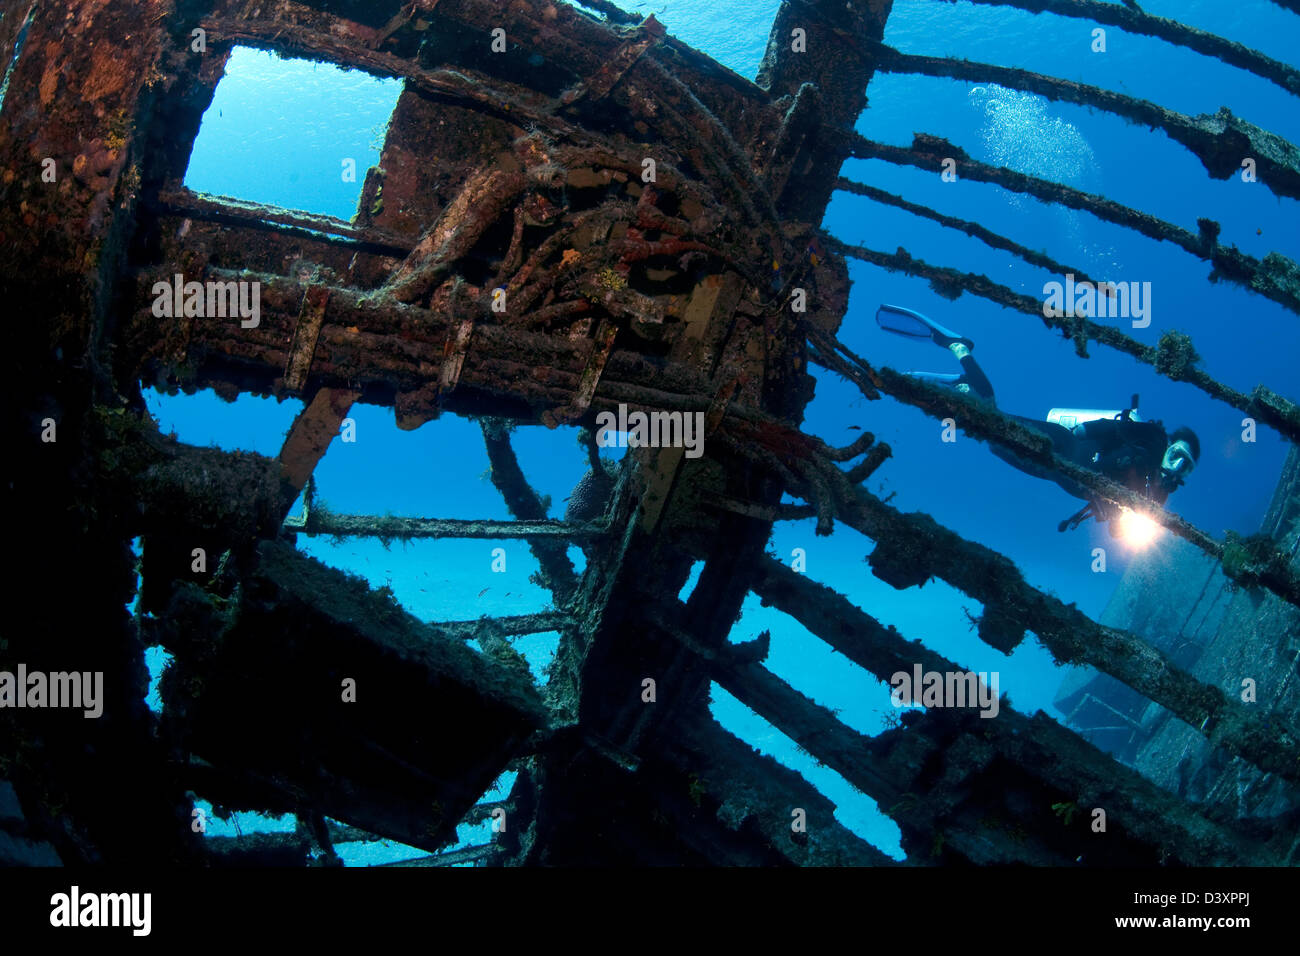 Wreckdiving the Russian Destroyer M.V. Captain Keith Tibbets. Stock Photo